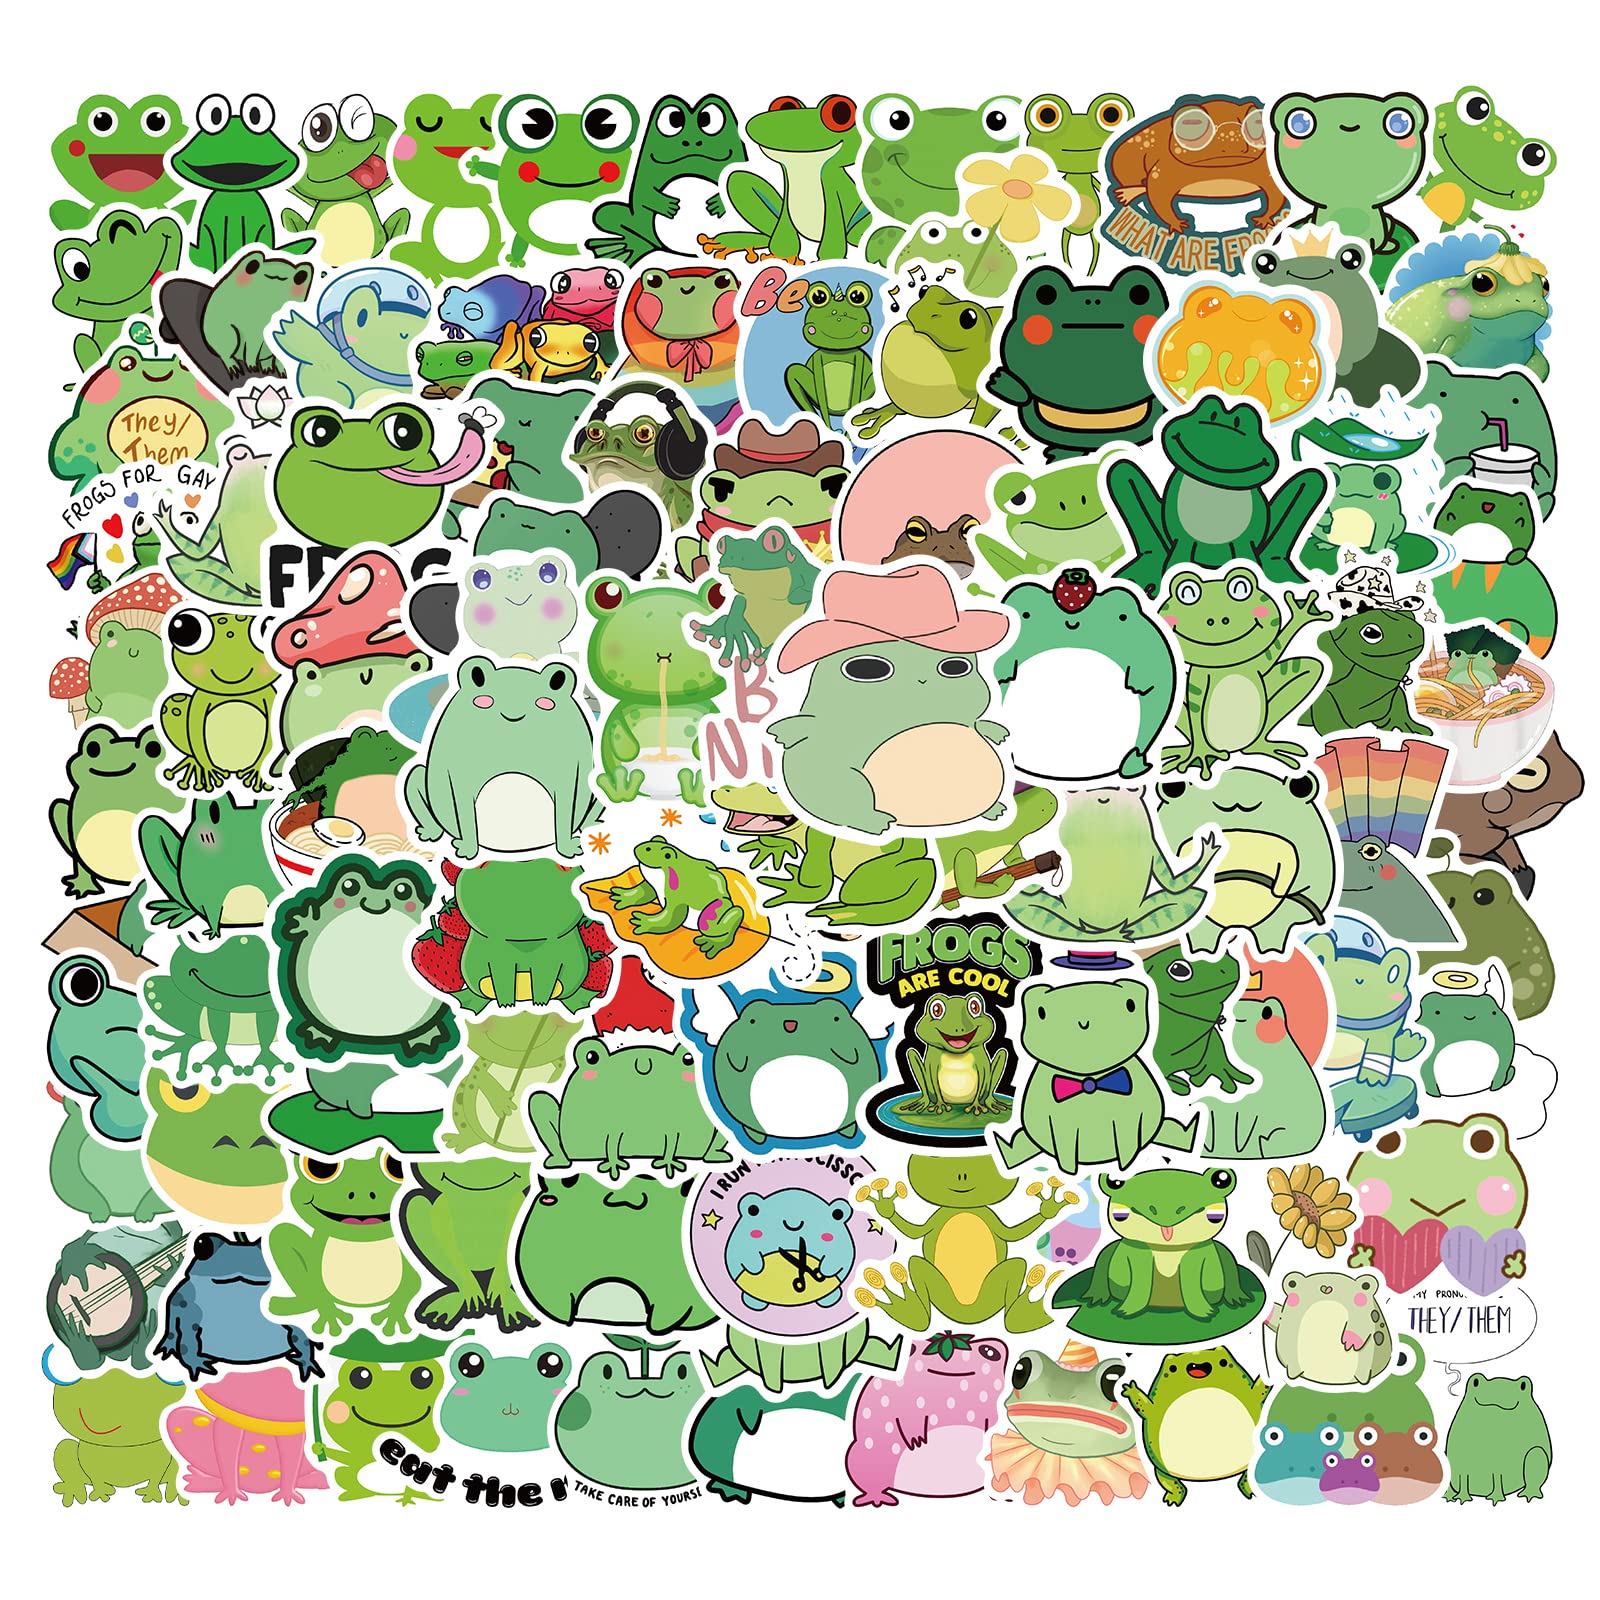 100pcs Frog Stickers Cute Aesthetic Vinyl Waterproof Sticker for Laptop, Guitar, Skateboard, Luggage, HydroFlasks, Gift for Kids Frog Lovers Teen Birthday Party : Toys & Games